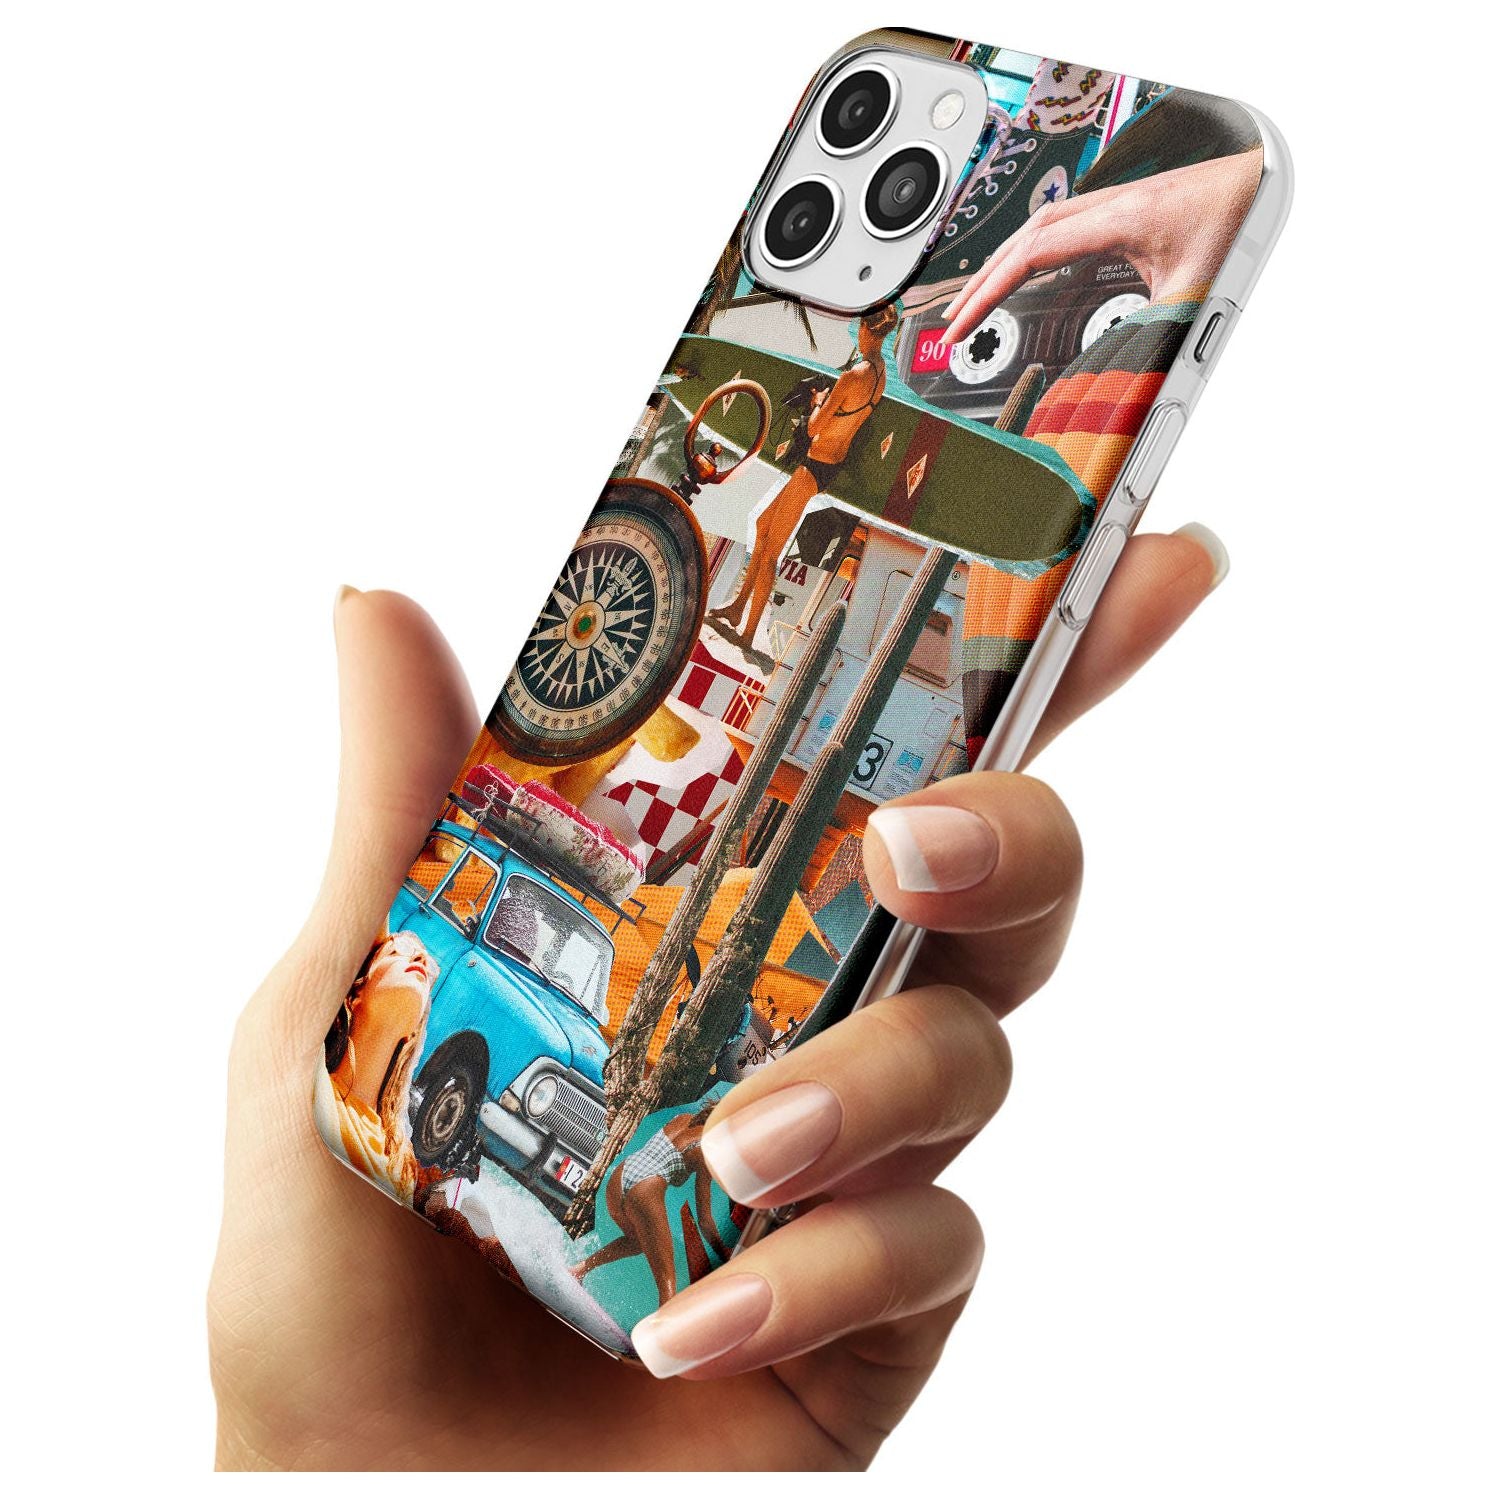 Vintage Collage: Road Trip Slim TPU Phone Case for iPhone 11 Pro Max